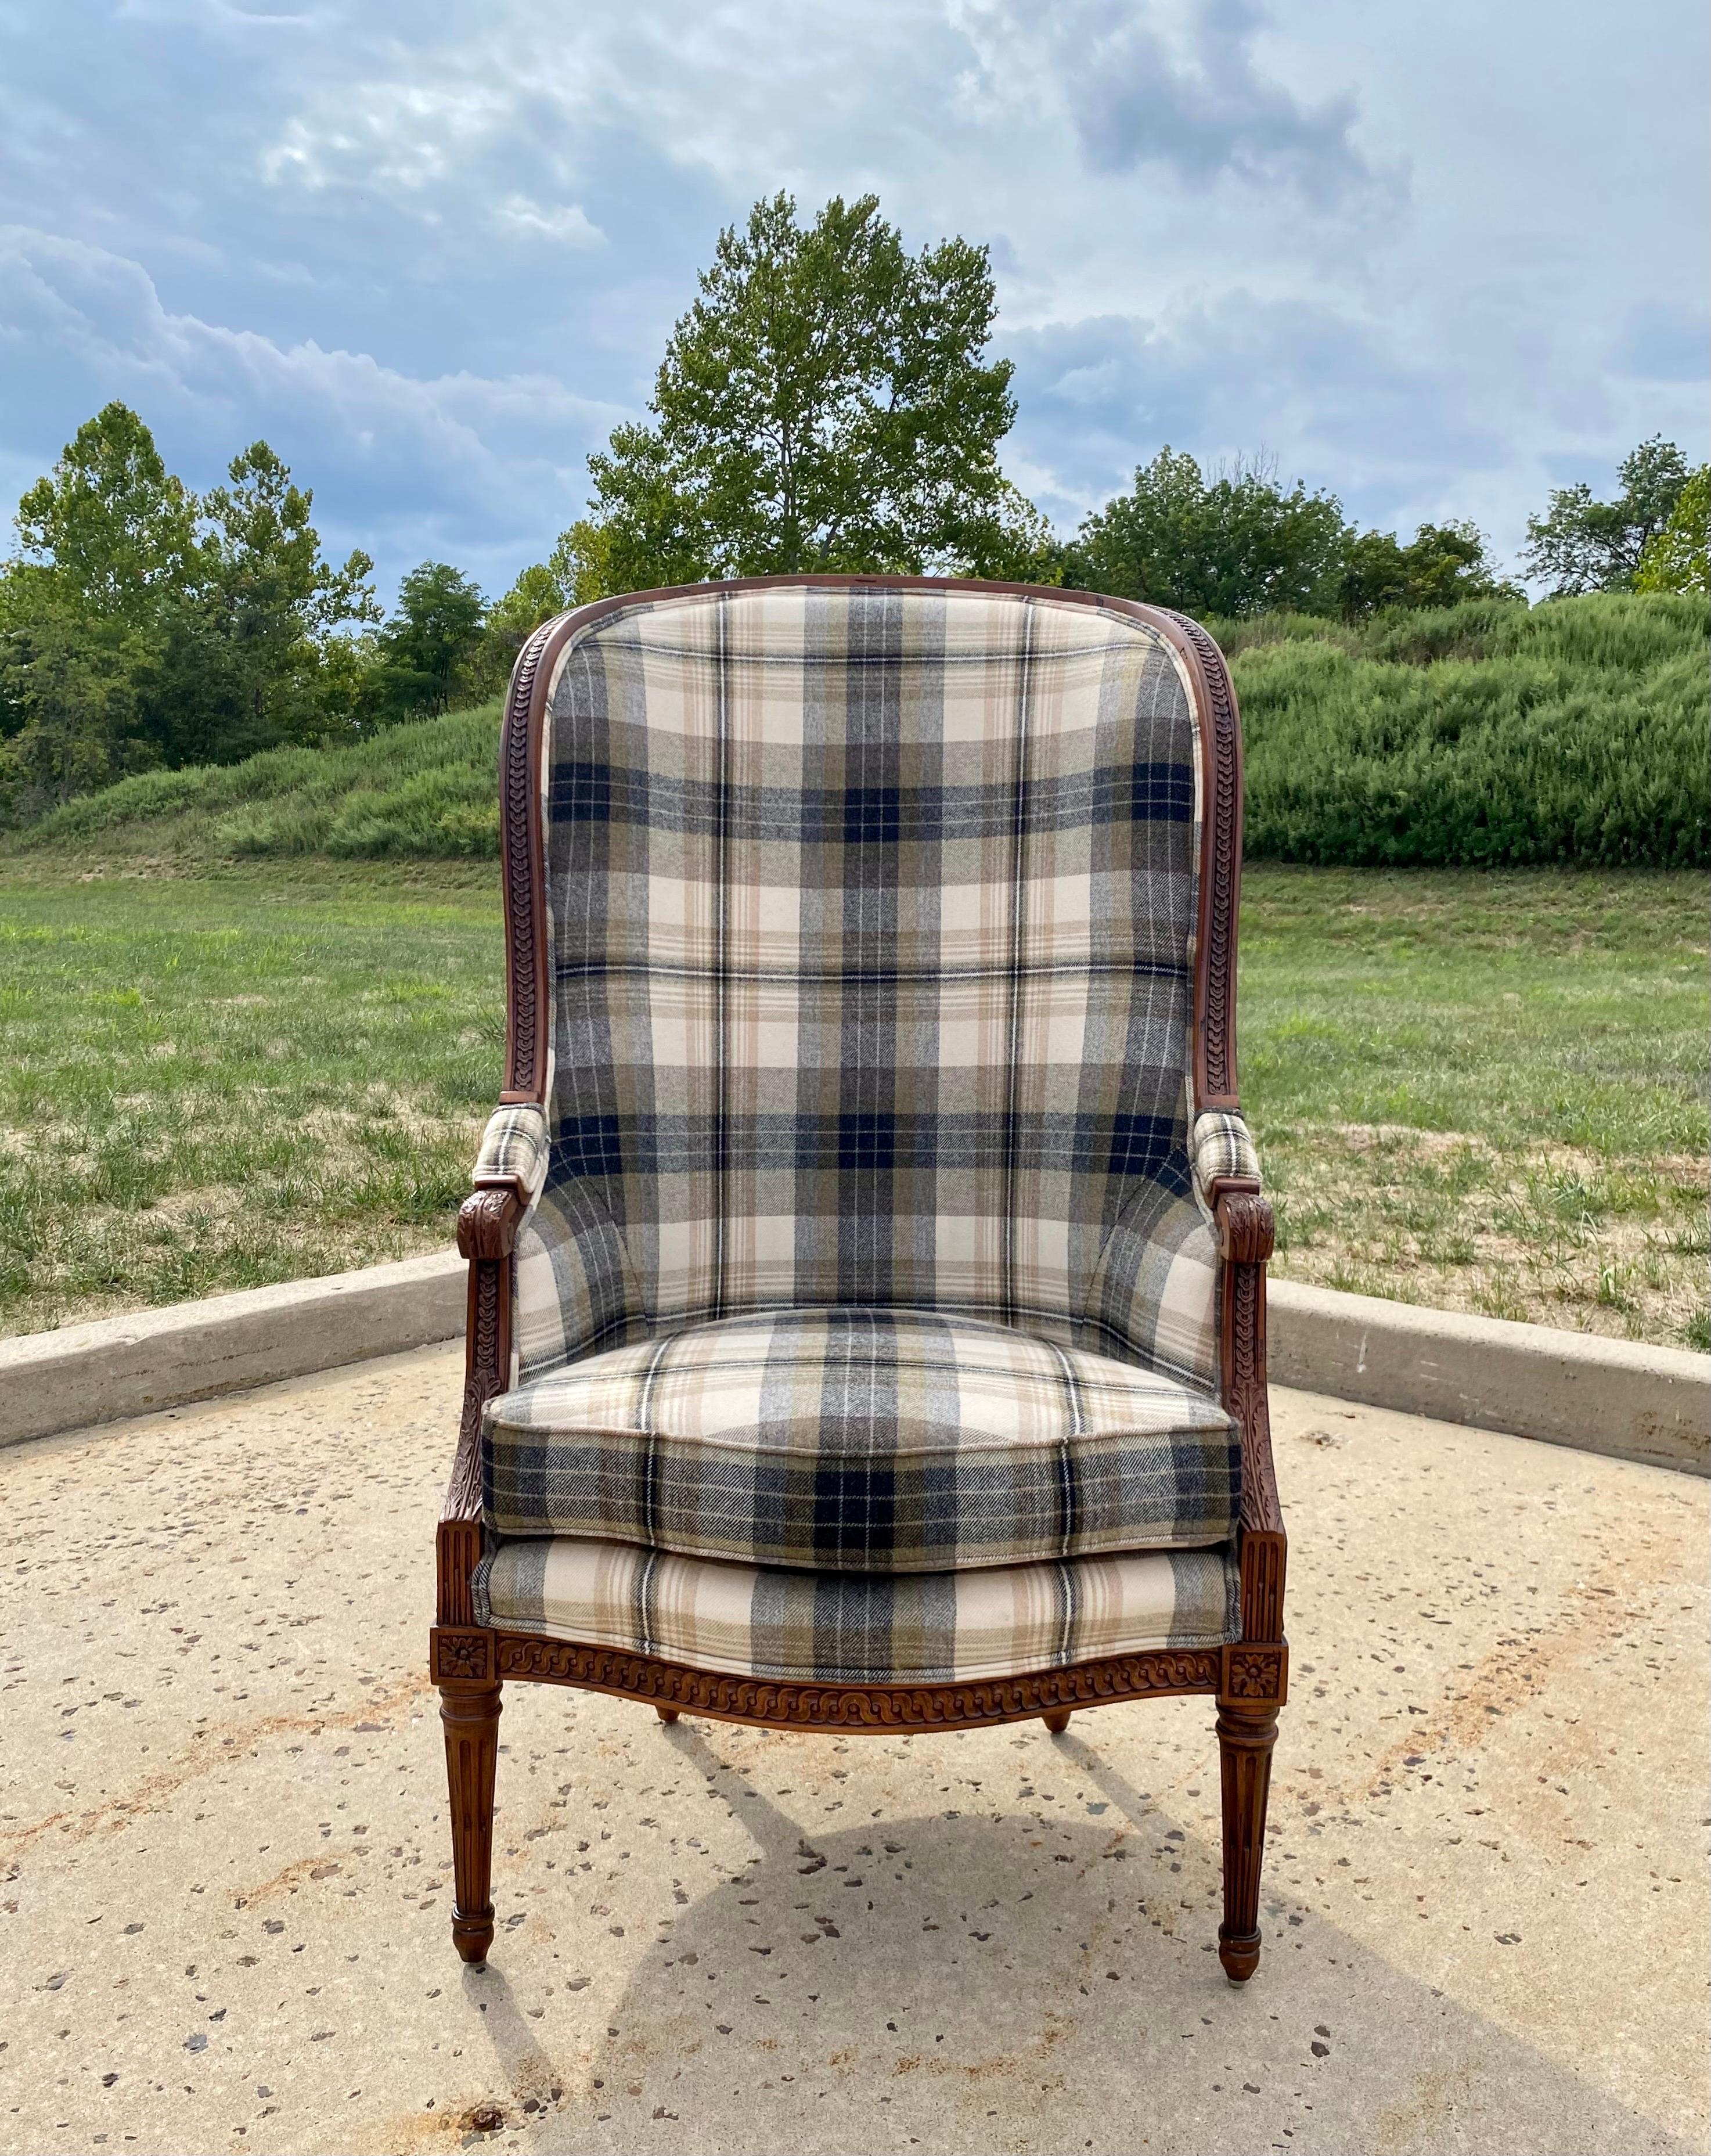 Iconic Ralph Lauren Home tall bergère arm chair upholstered in a classic wool plaid upholstery with contrasting embossed black leather snakeskin. This dramatic balloon shaped porters chair has a beautifully carved wood frame and an exposed back that